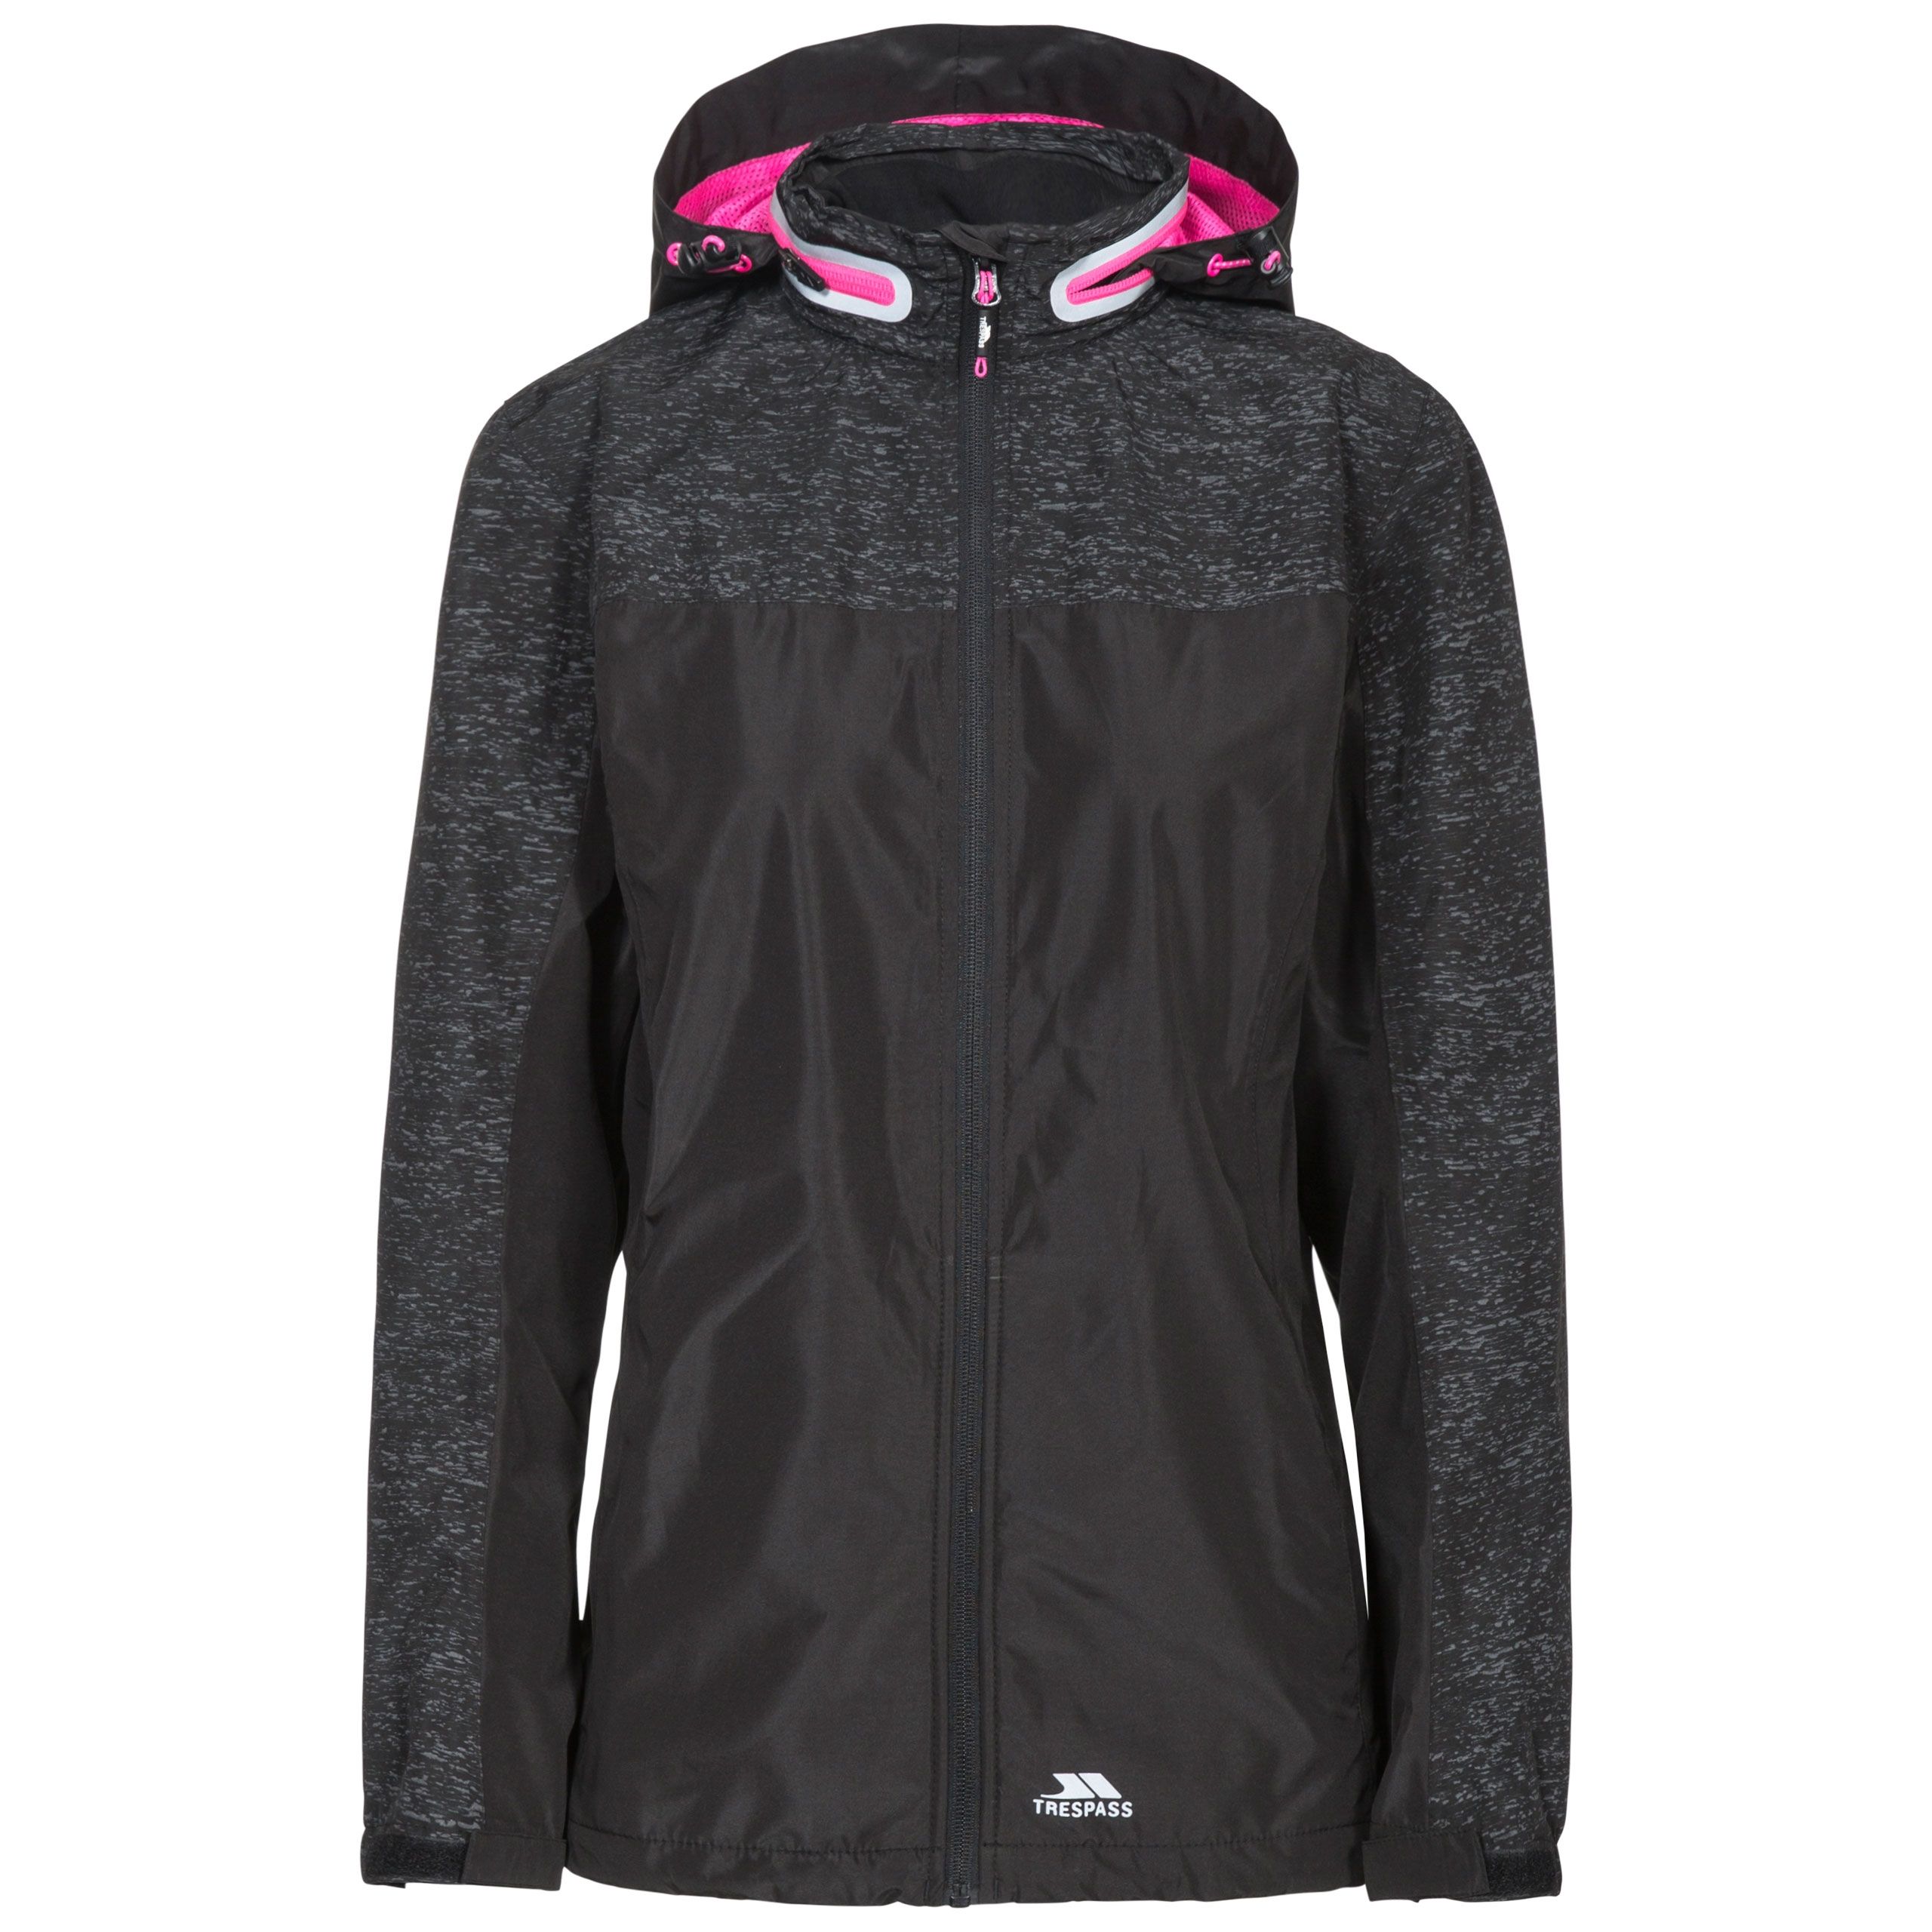 Attraction Womens Breathable Waterproof Jacket